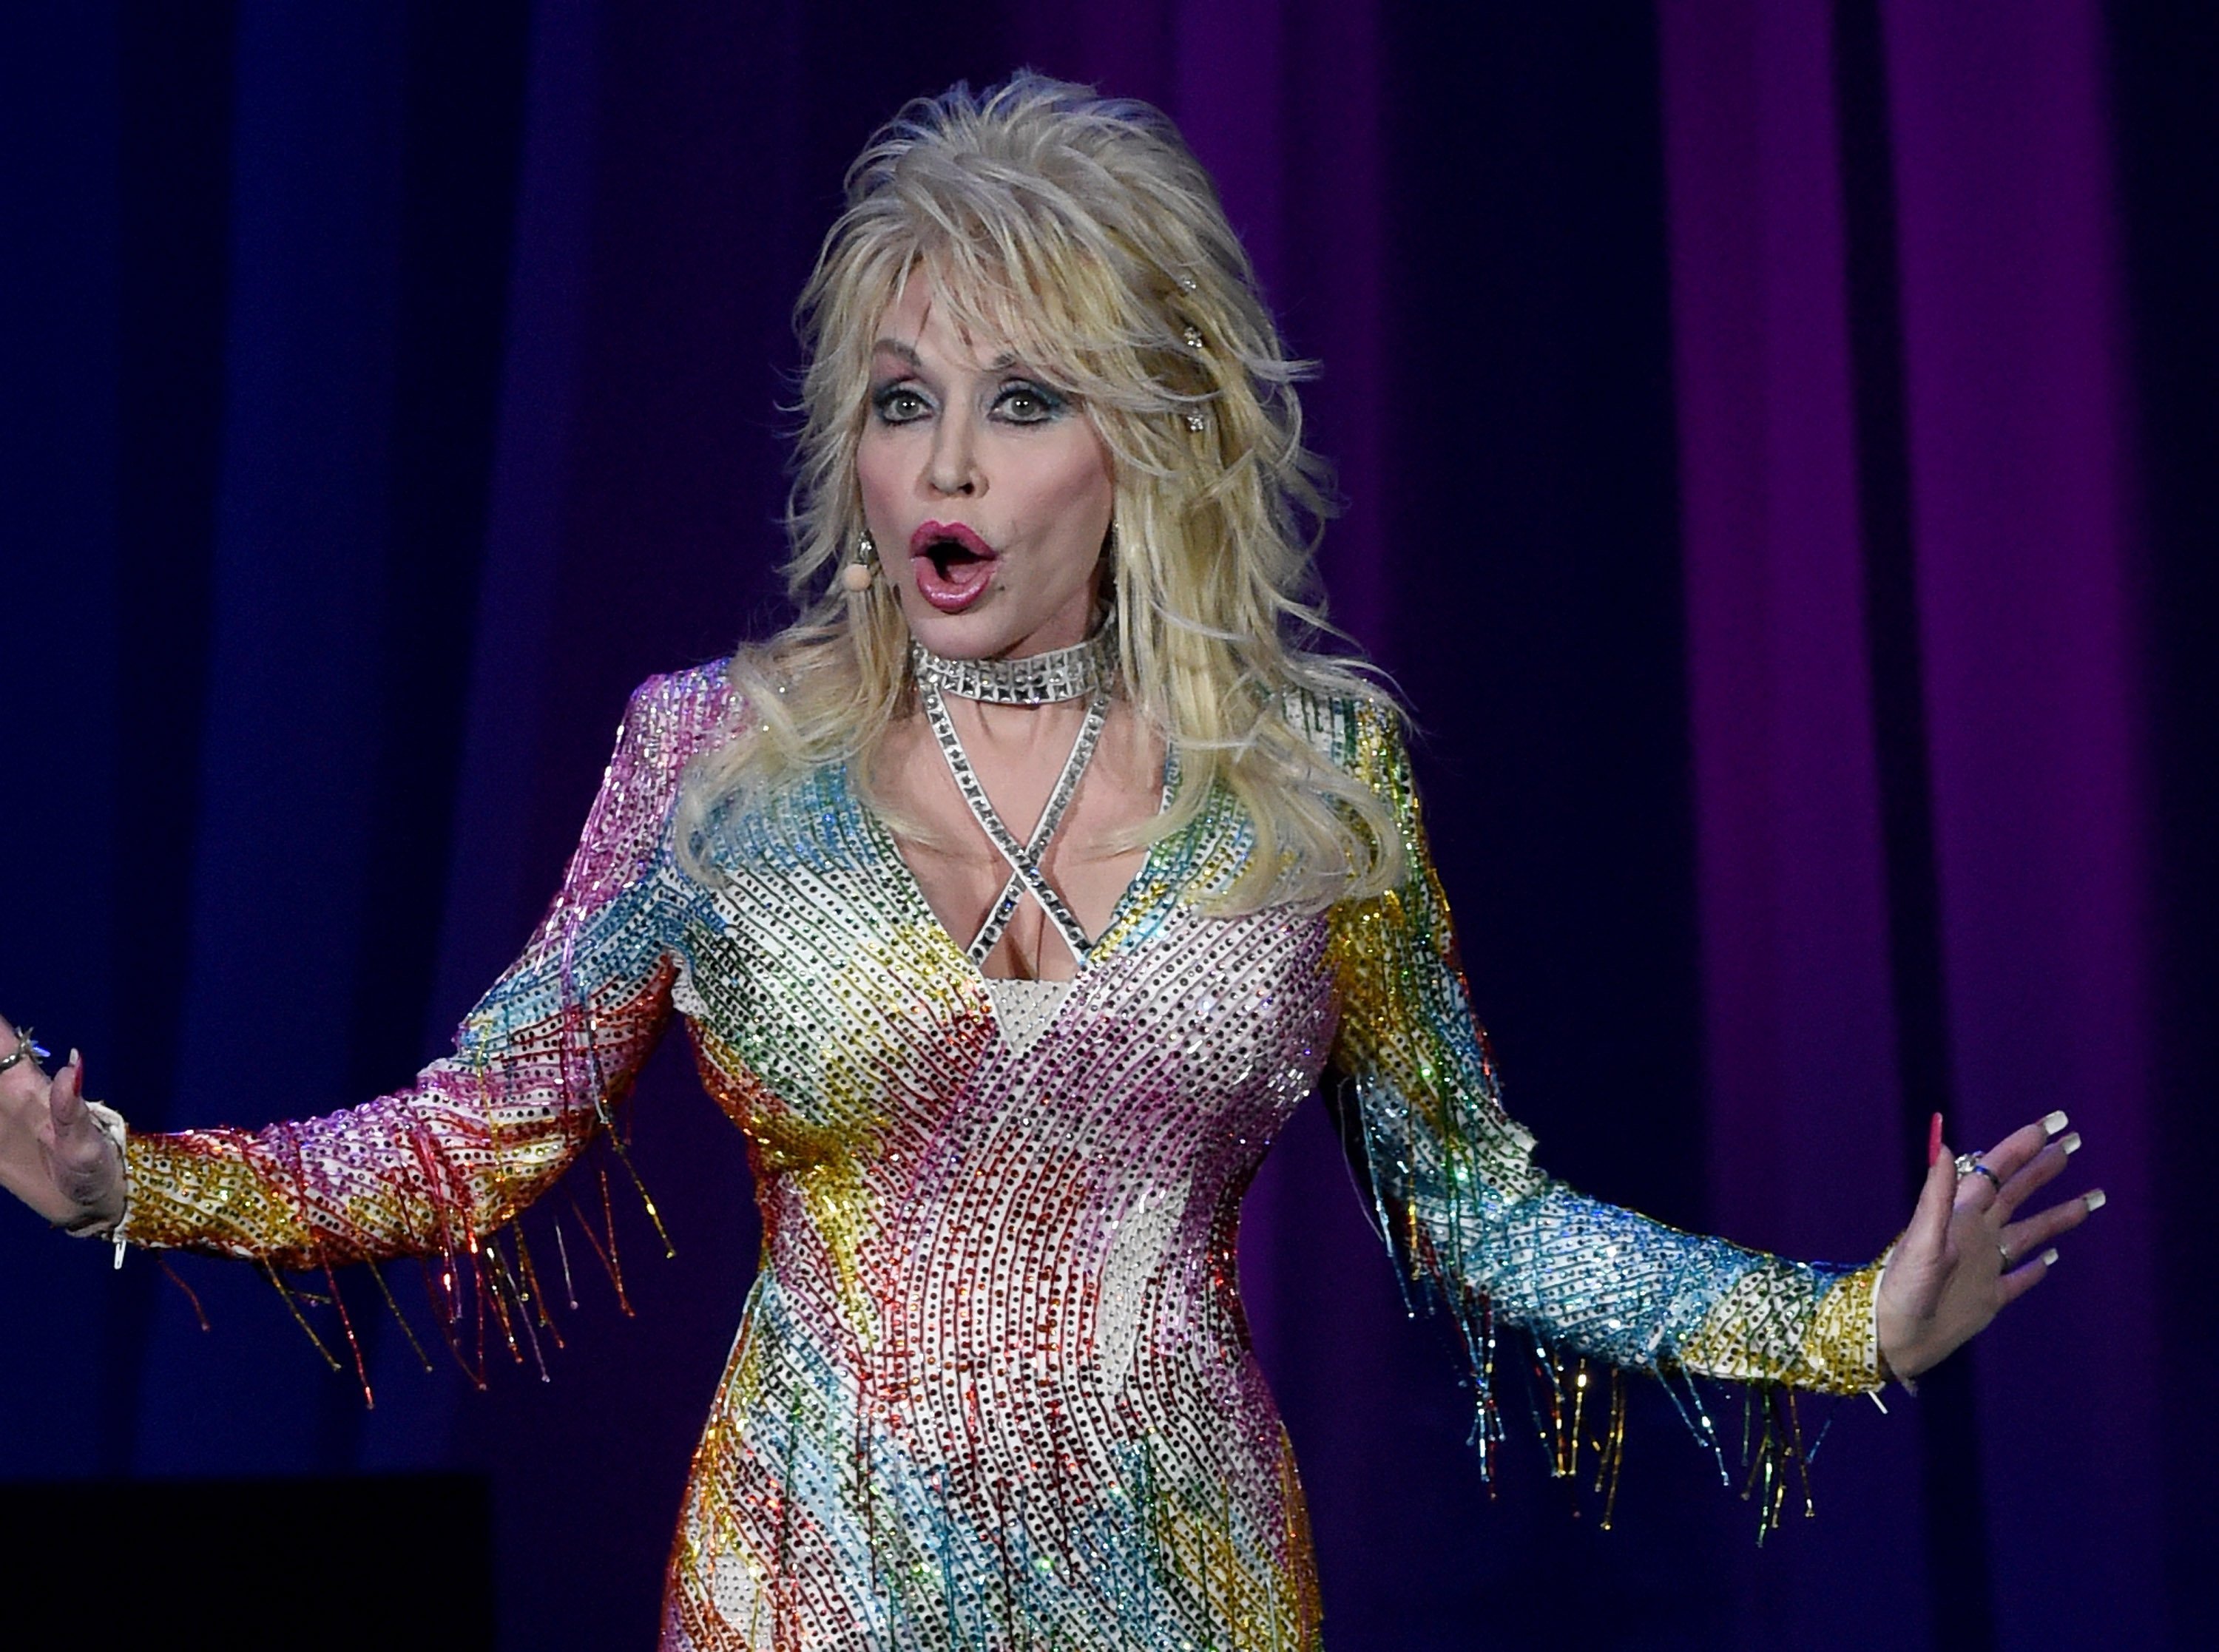  Dolly Parton: Pure & Simple Benefiting The Opry Trust Fund at Ryman Auditorium on August 1, 2015. | Photo: GettyImages